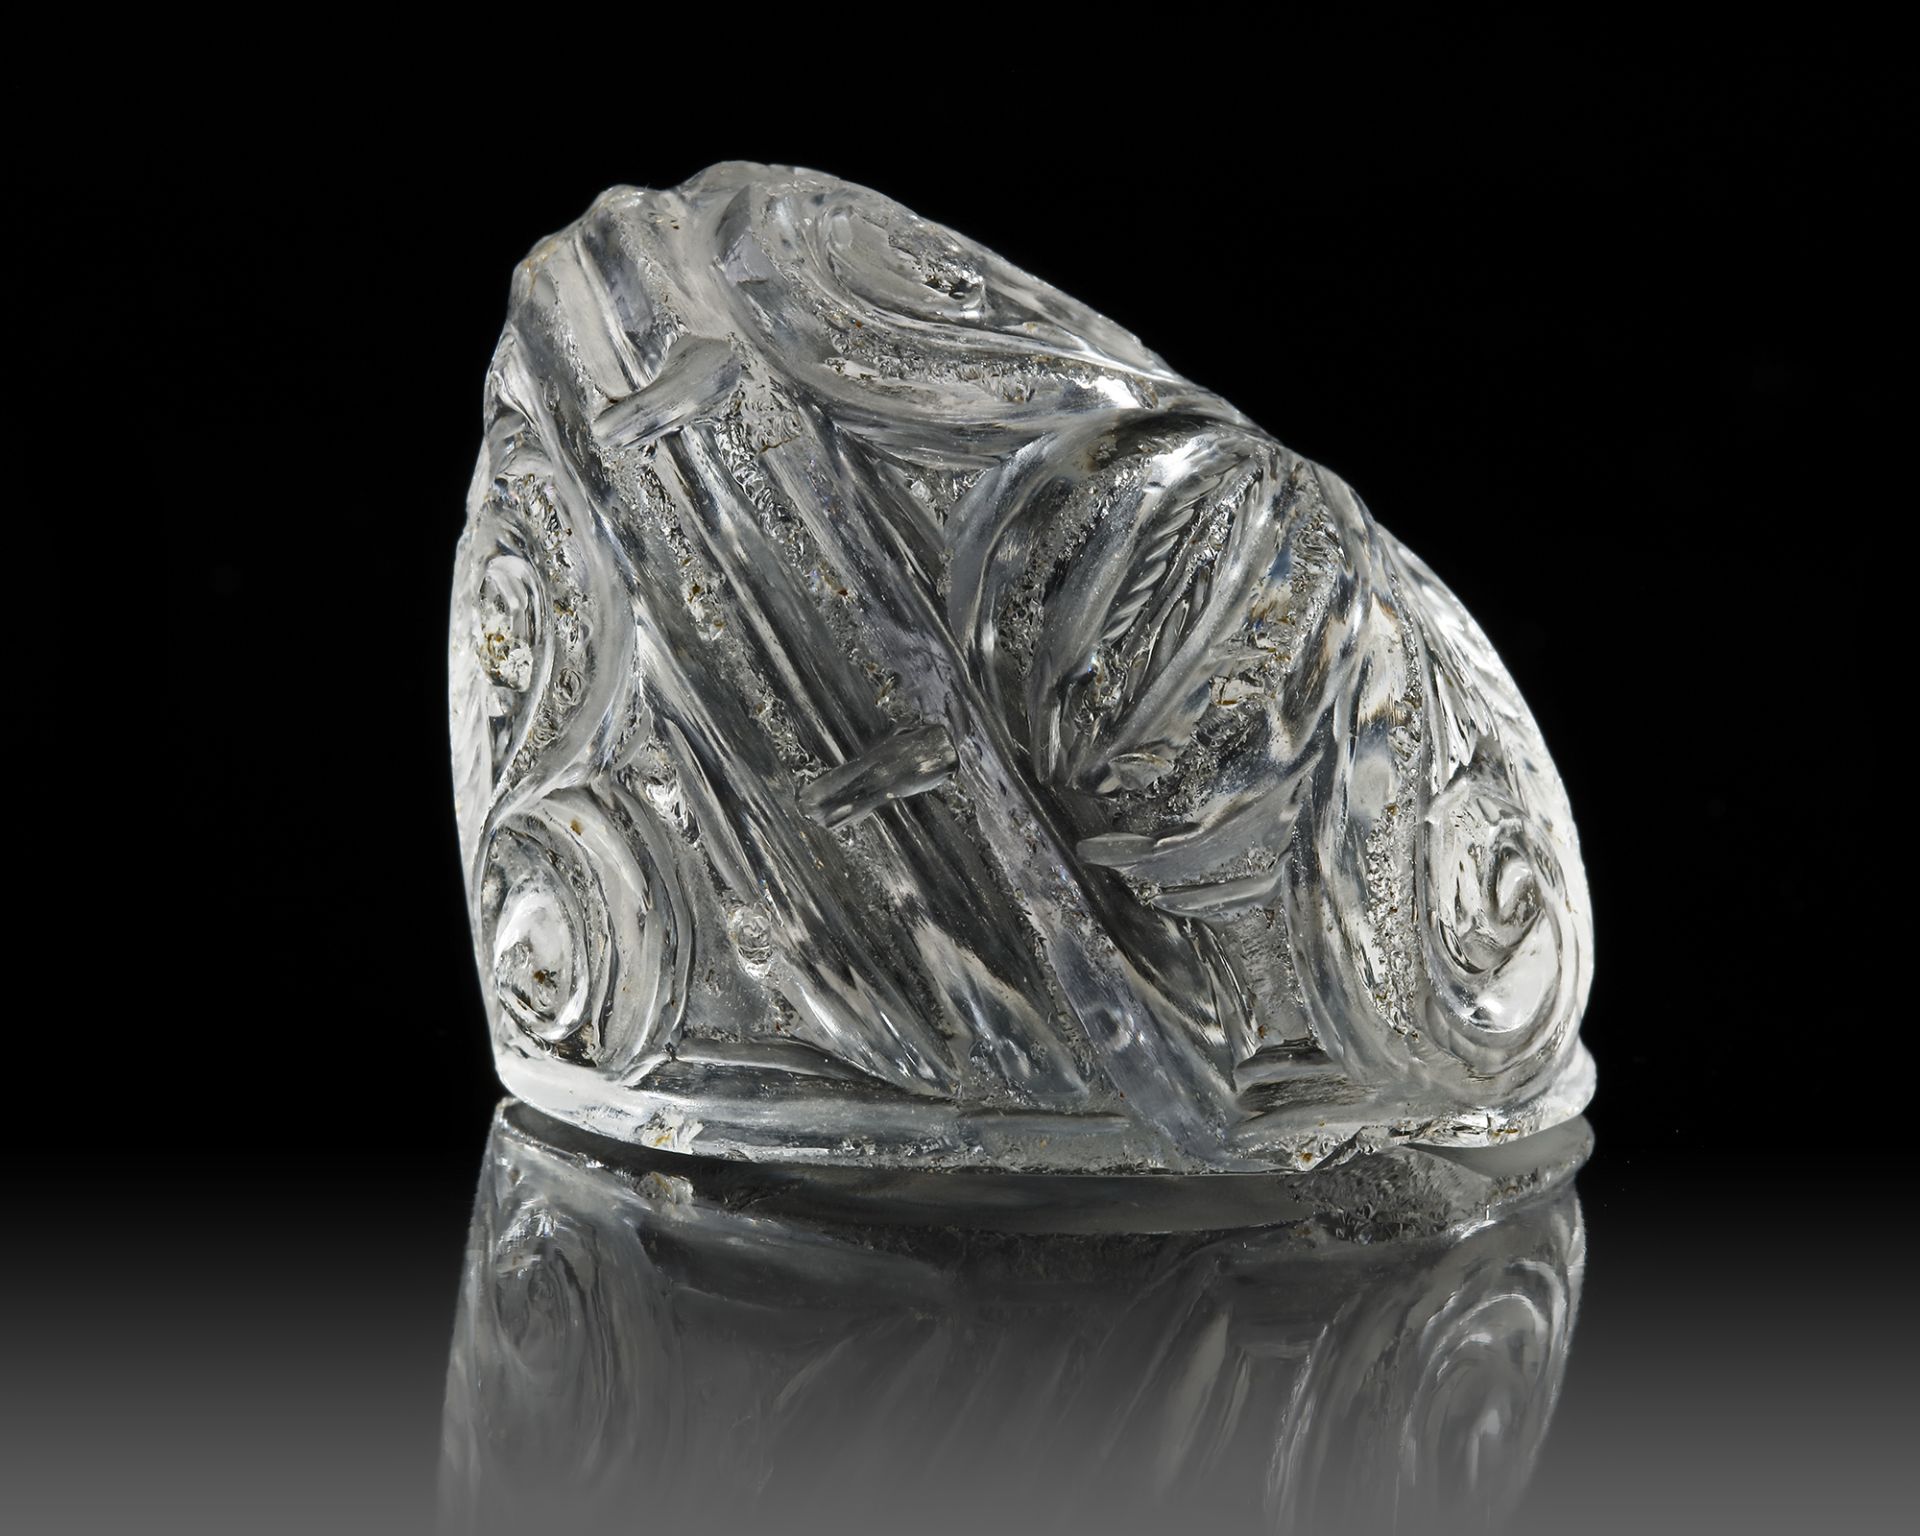 A FATIMID ROCK CRYSTAL CHESS PIECE, EGYPT, 11TH CENTURY - Image 6 of 6